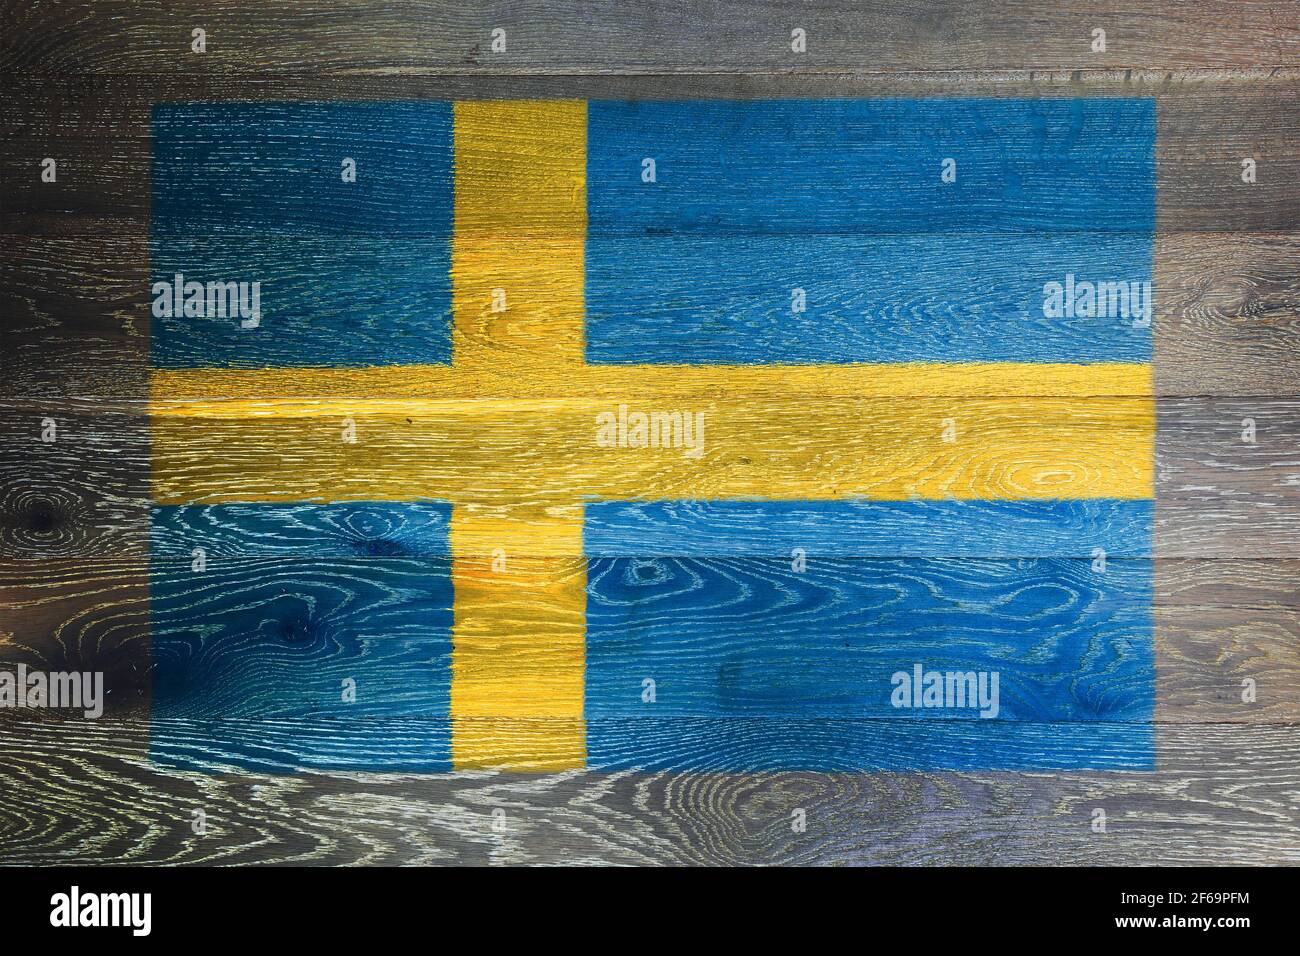 Sweden flag on rustic old wood surface background Stock Photo